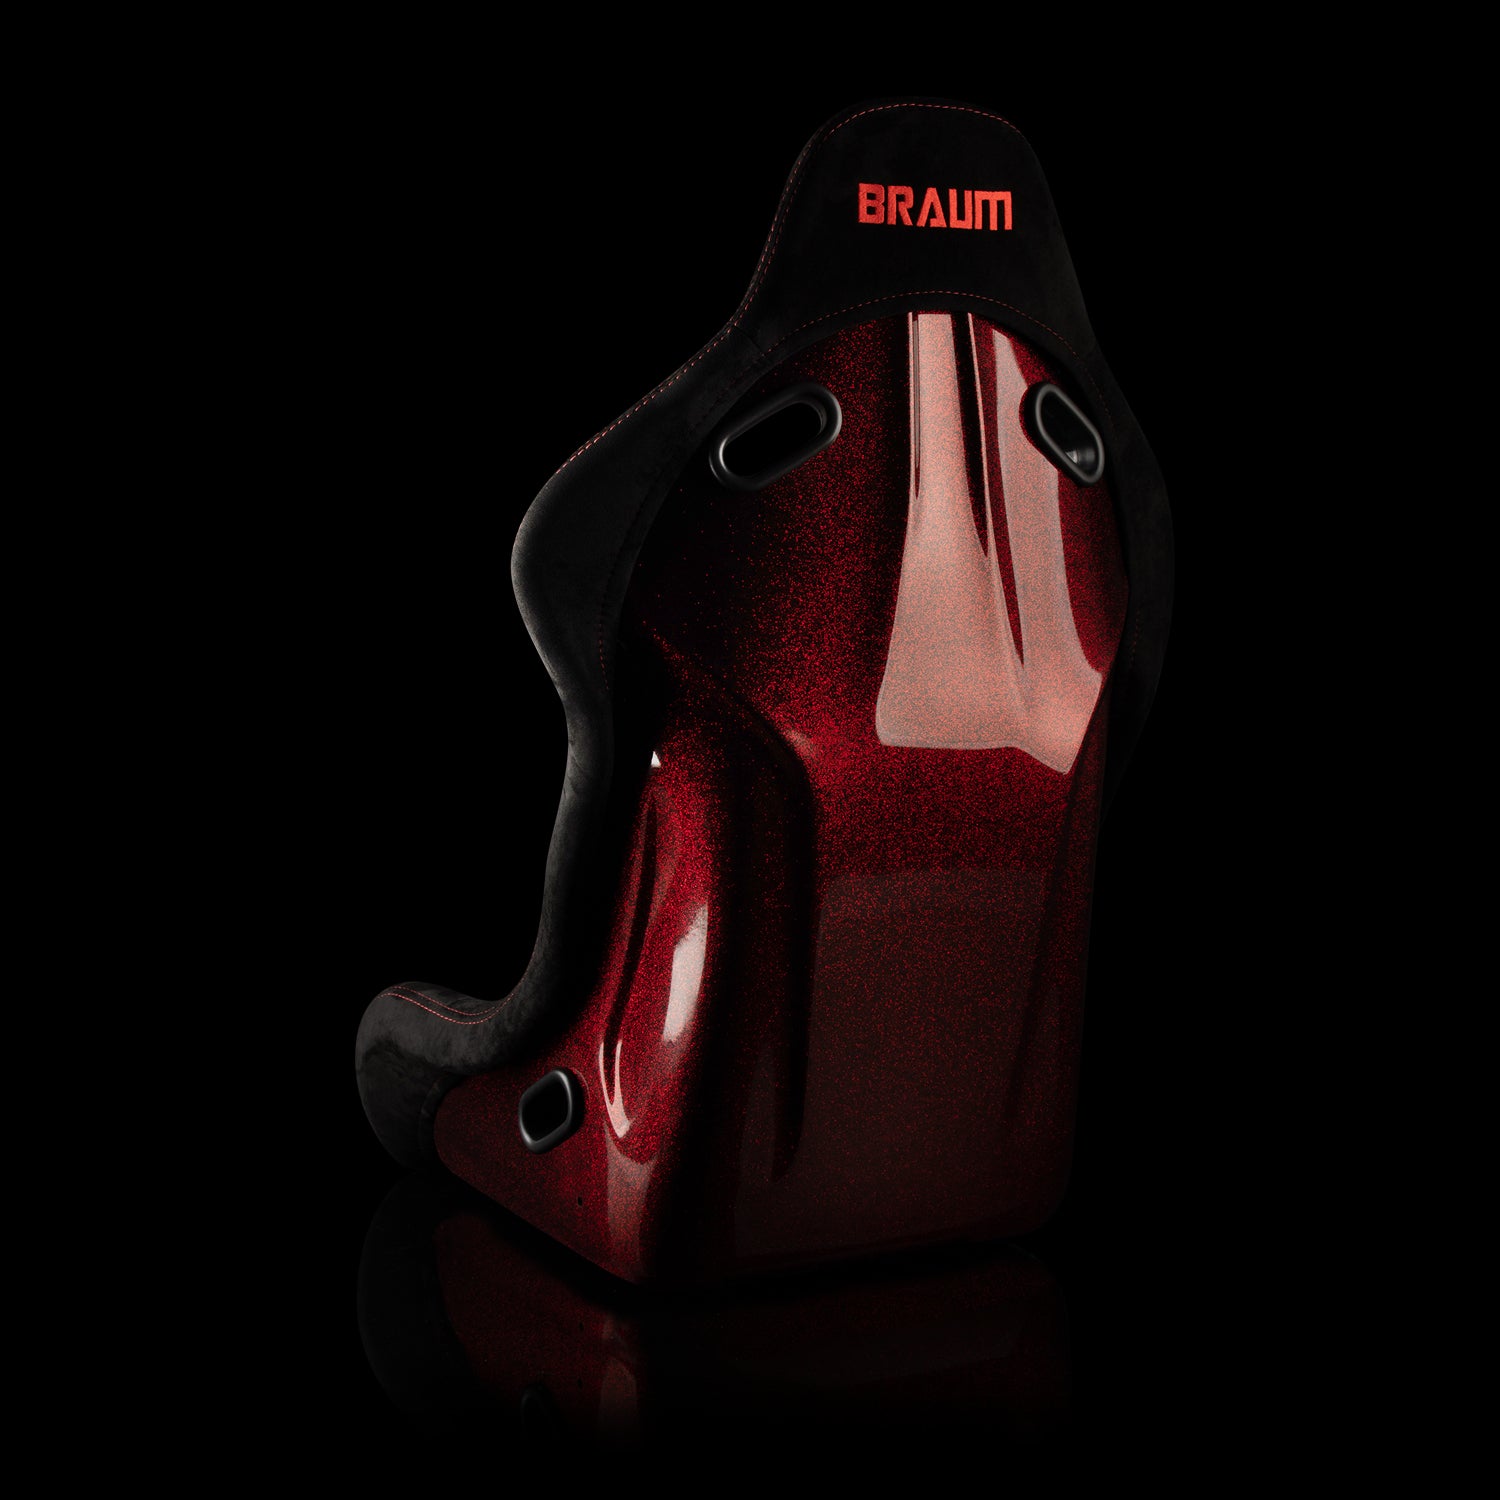 FALCON-S Series Fixed Back Bucket Composite Seat